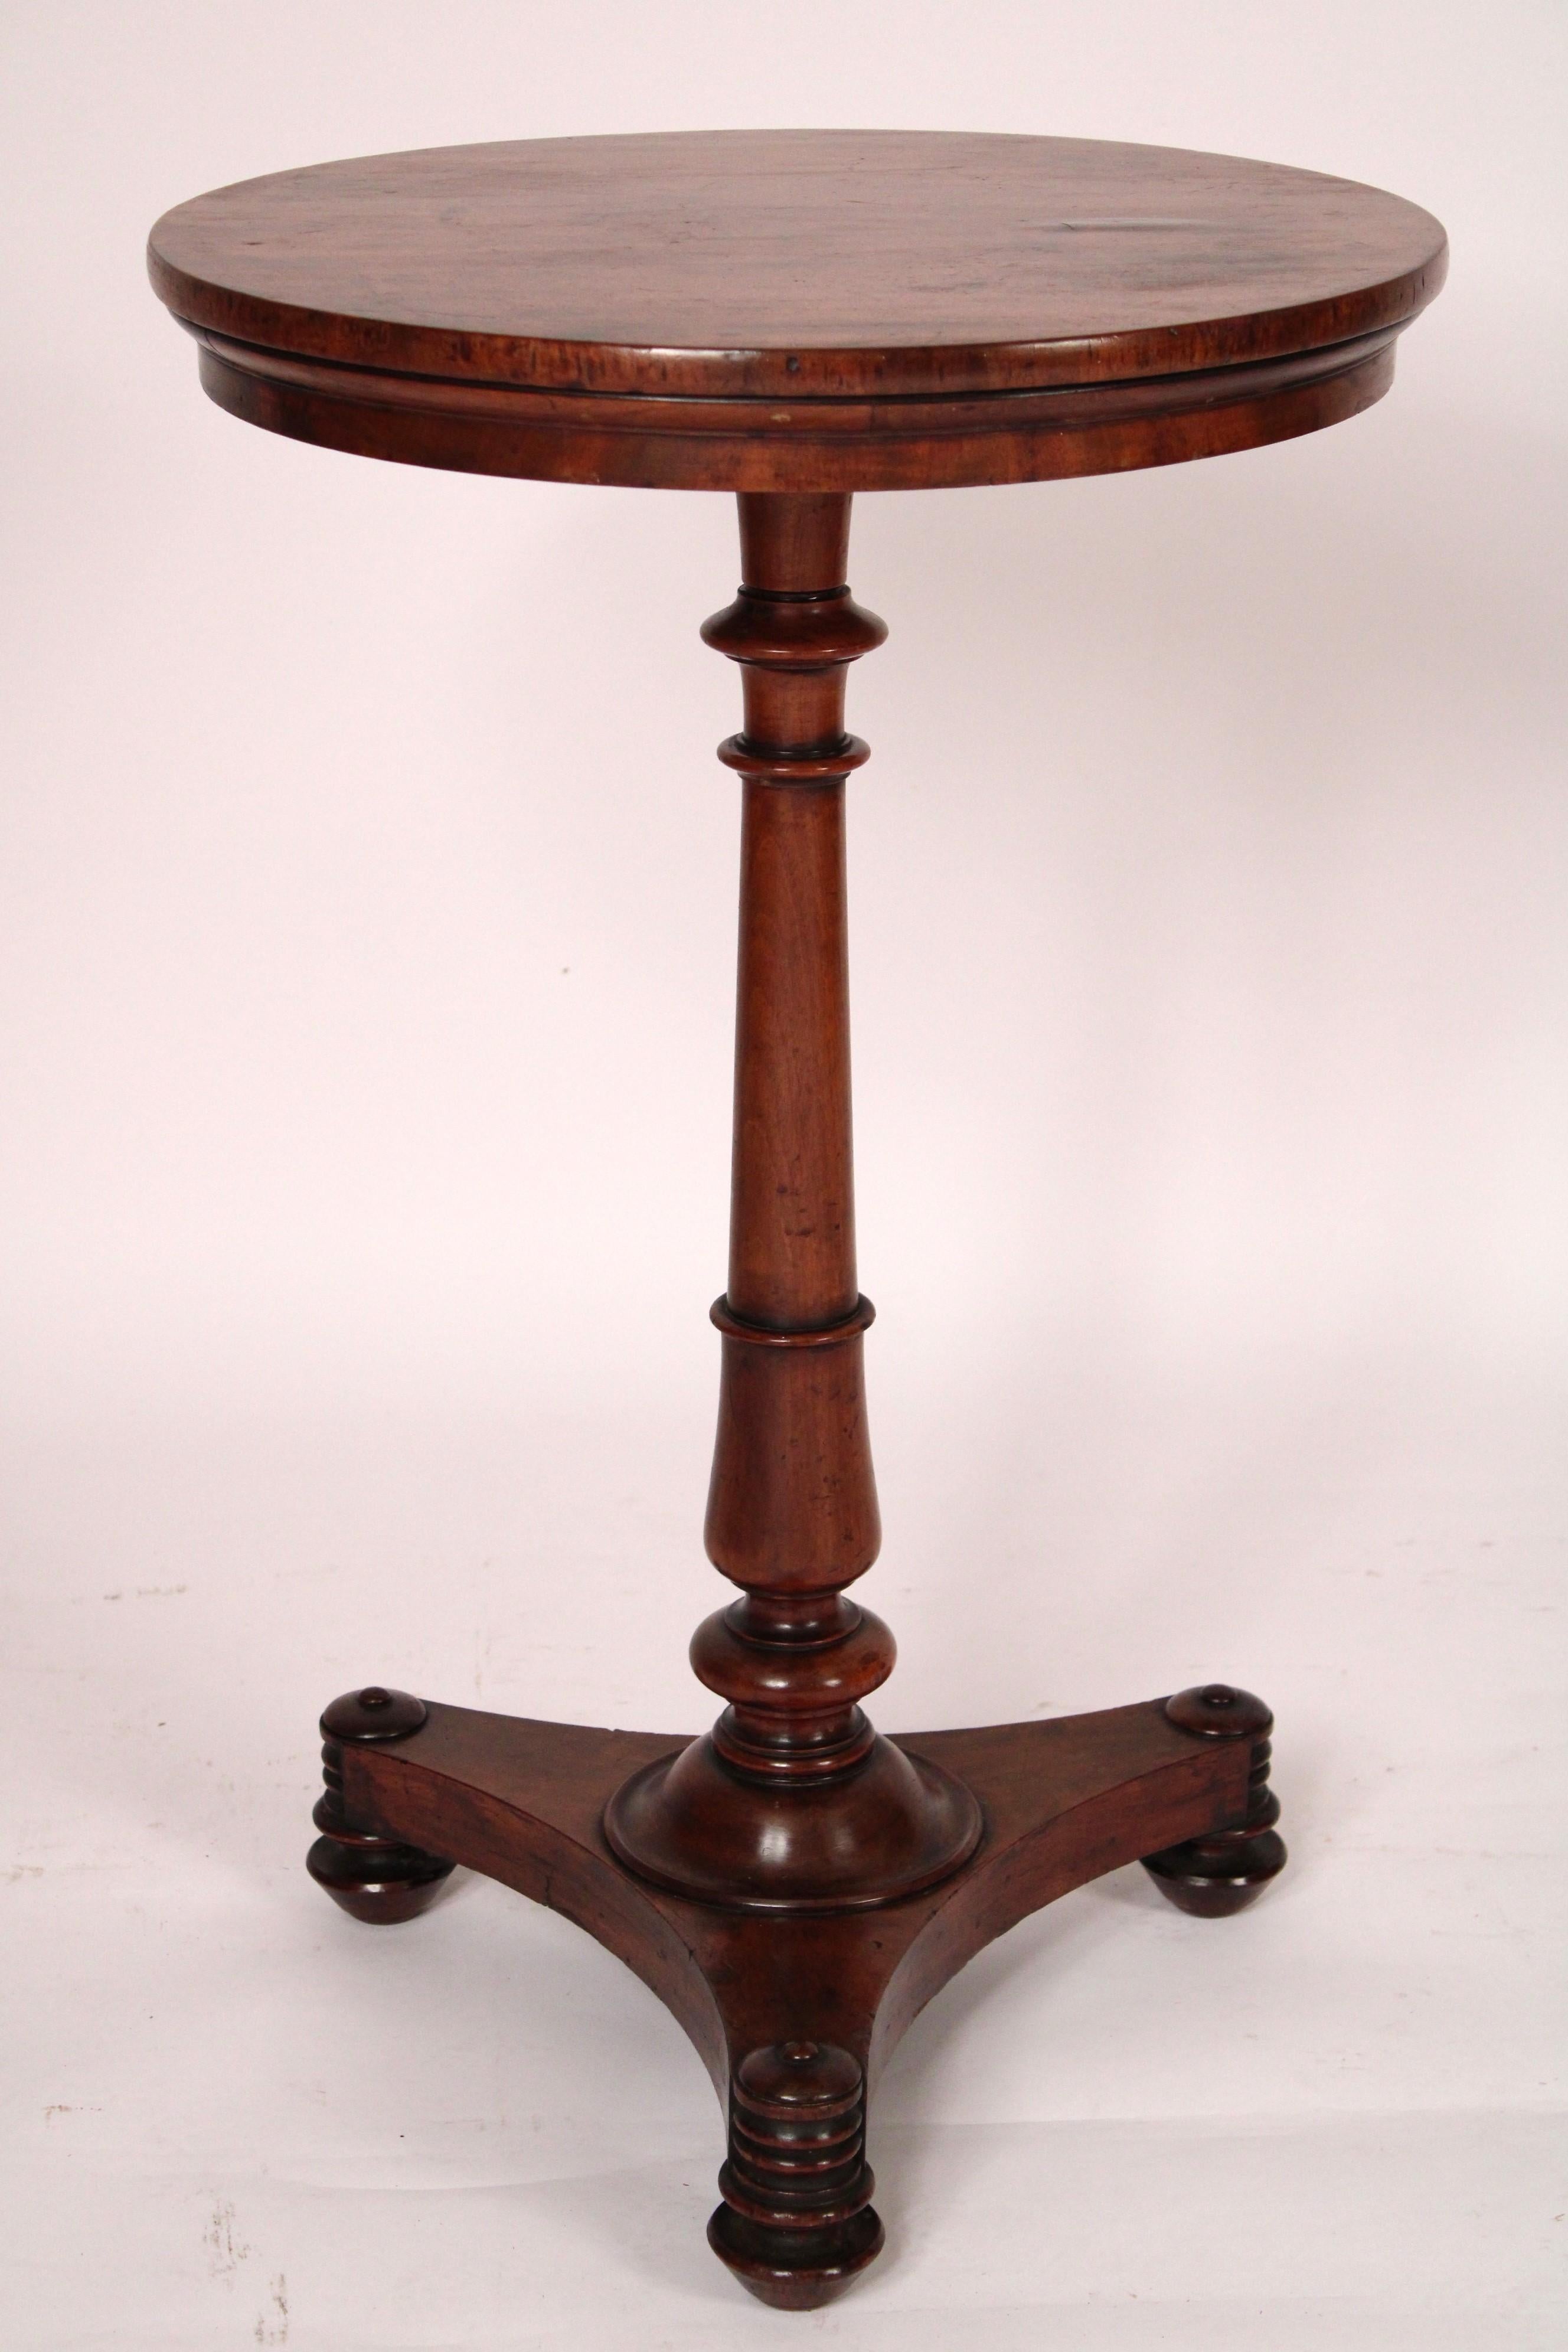 English regency mahogany candlestand / occasional table, circa 1820. With a circular top an elongated vase shaped pedestal resting on a trefid base with beehive corners, resting on turned tapered feet. With an excellent old patina. The bottom of the